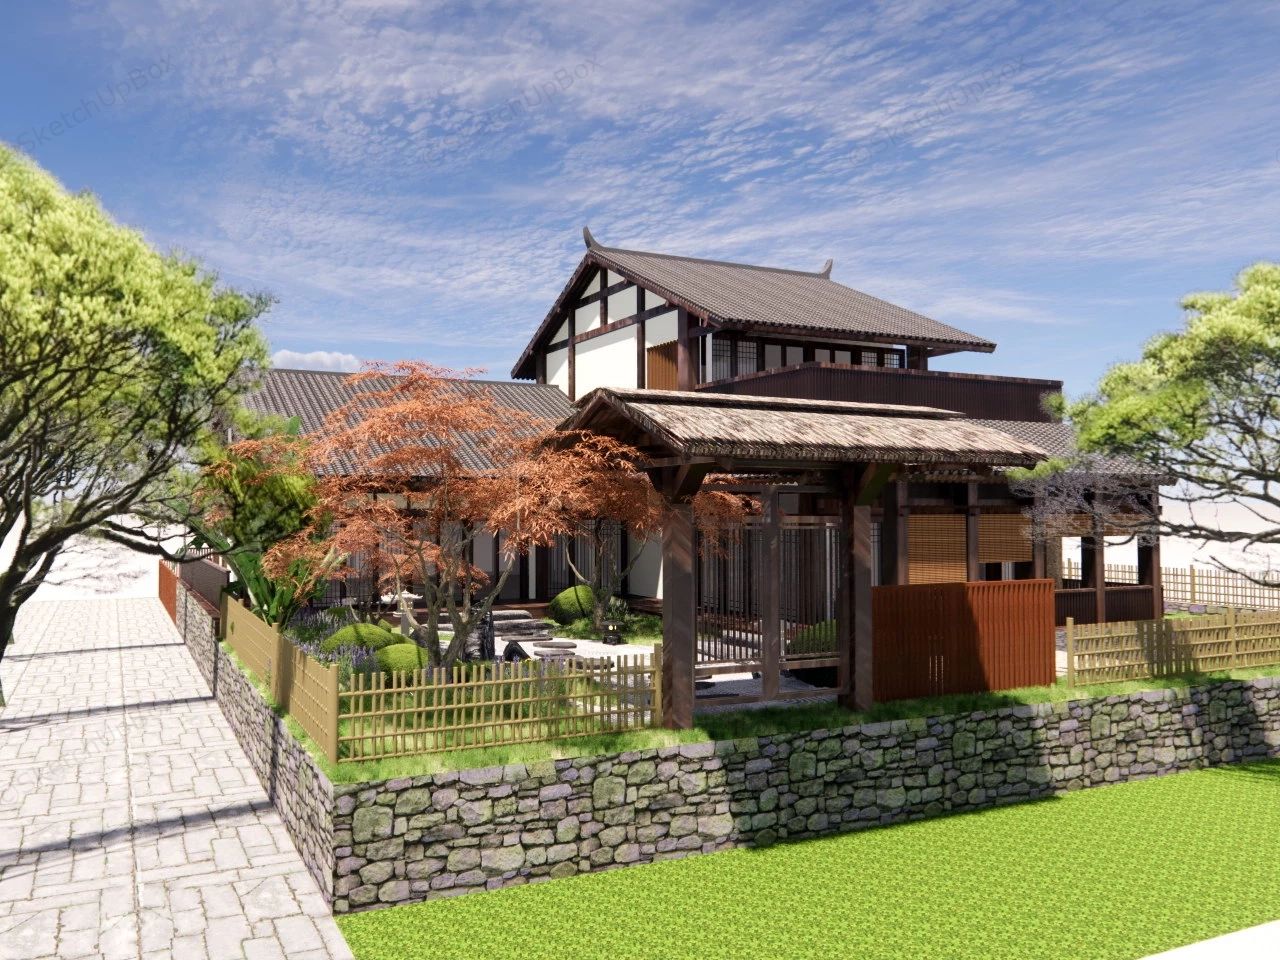 Traditional Japanese House With Garden Design sketchup model preview - SketchupBox